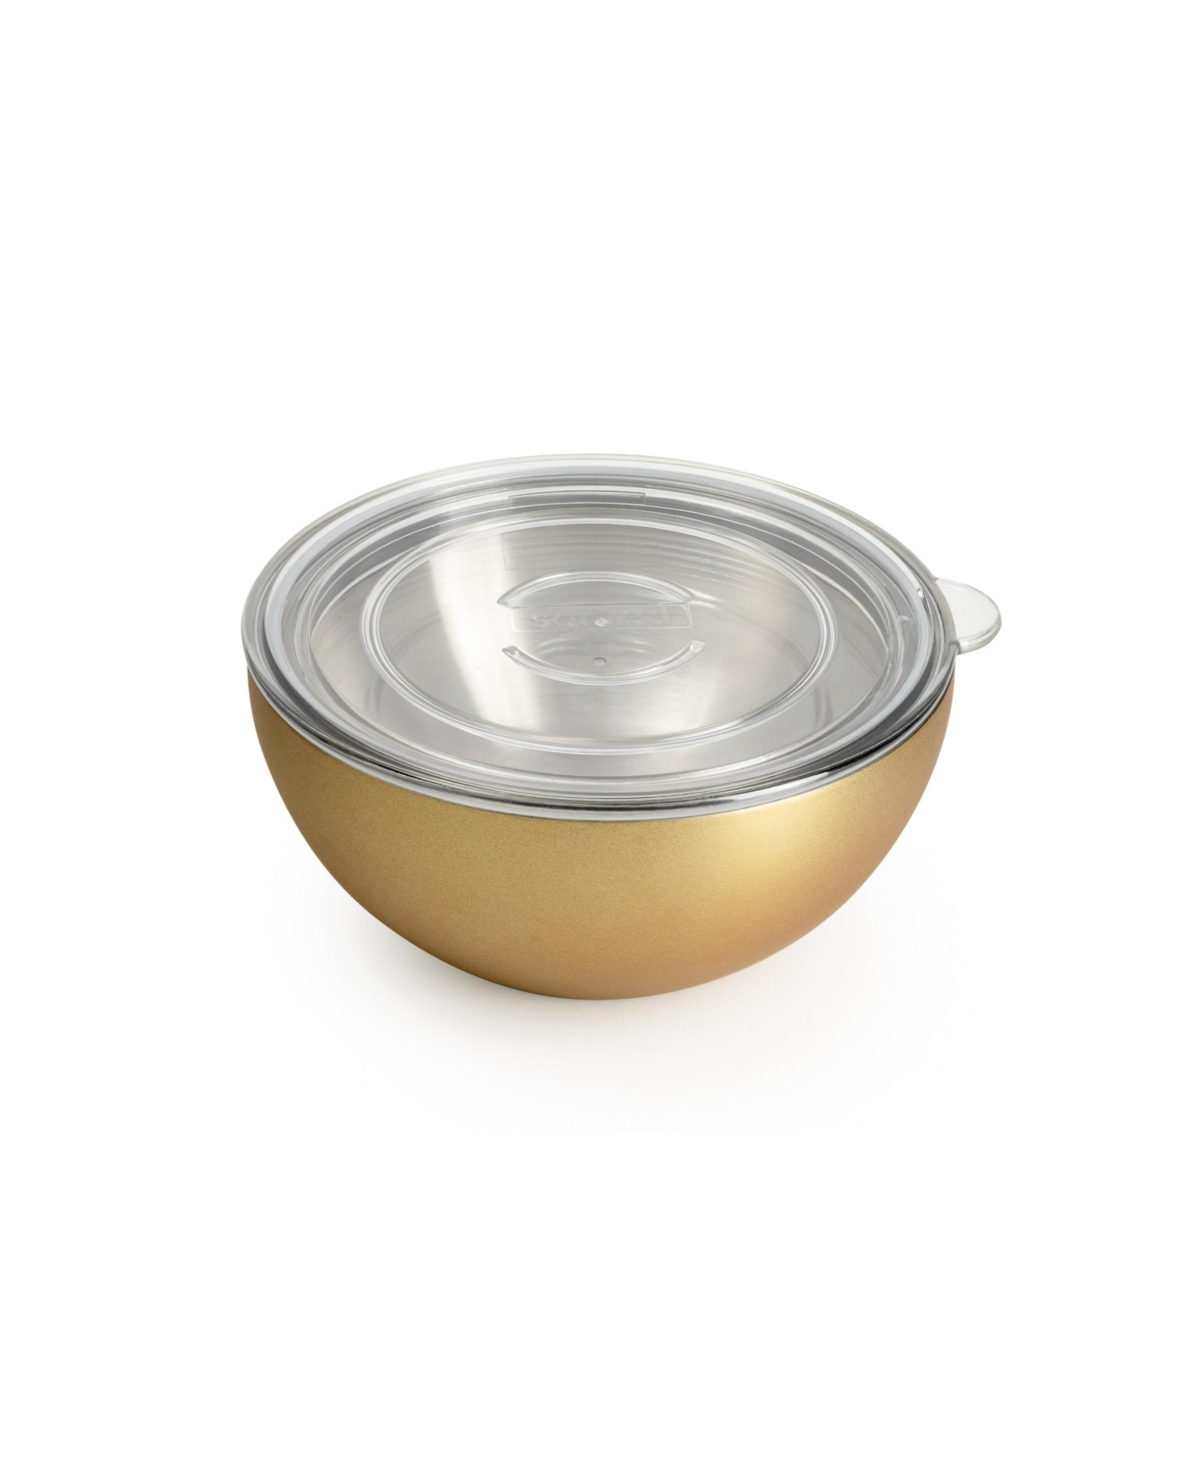 Served Vacuum-insulated Double-walled Copper-lined Stainless Steel Small Serving Bowl, 0.62 Quarts In Golden